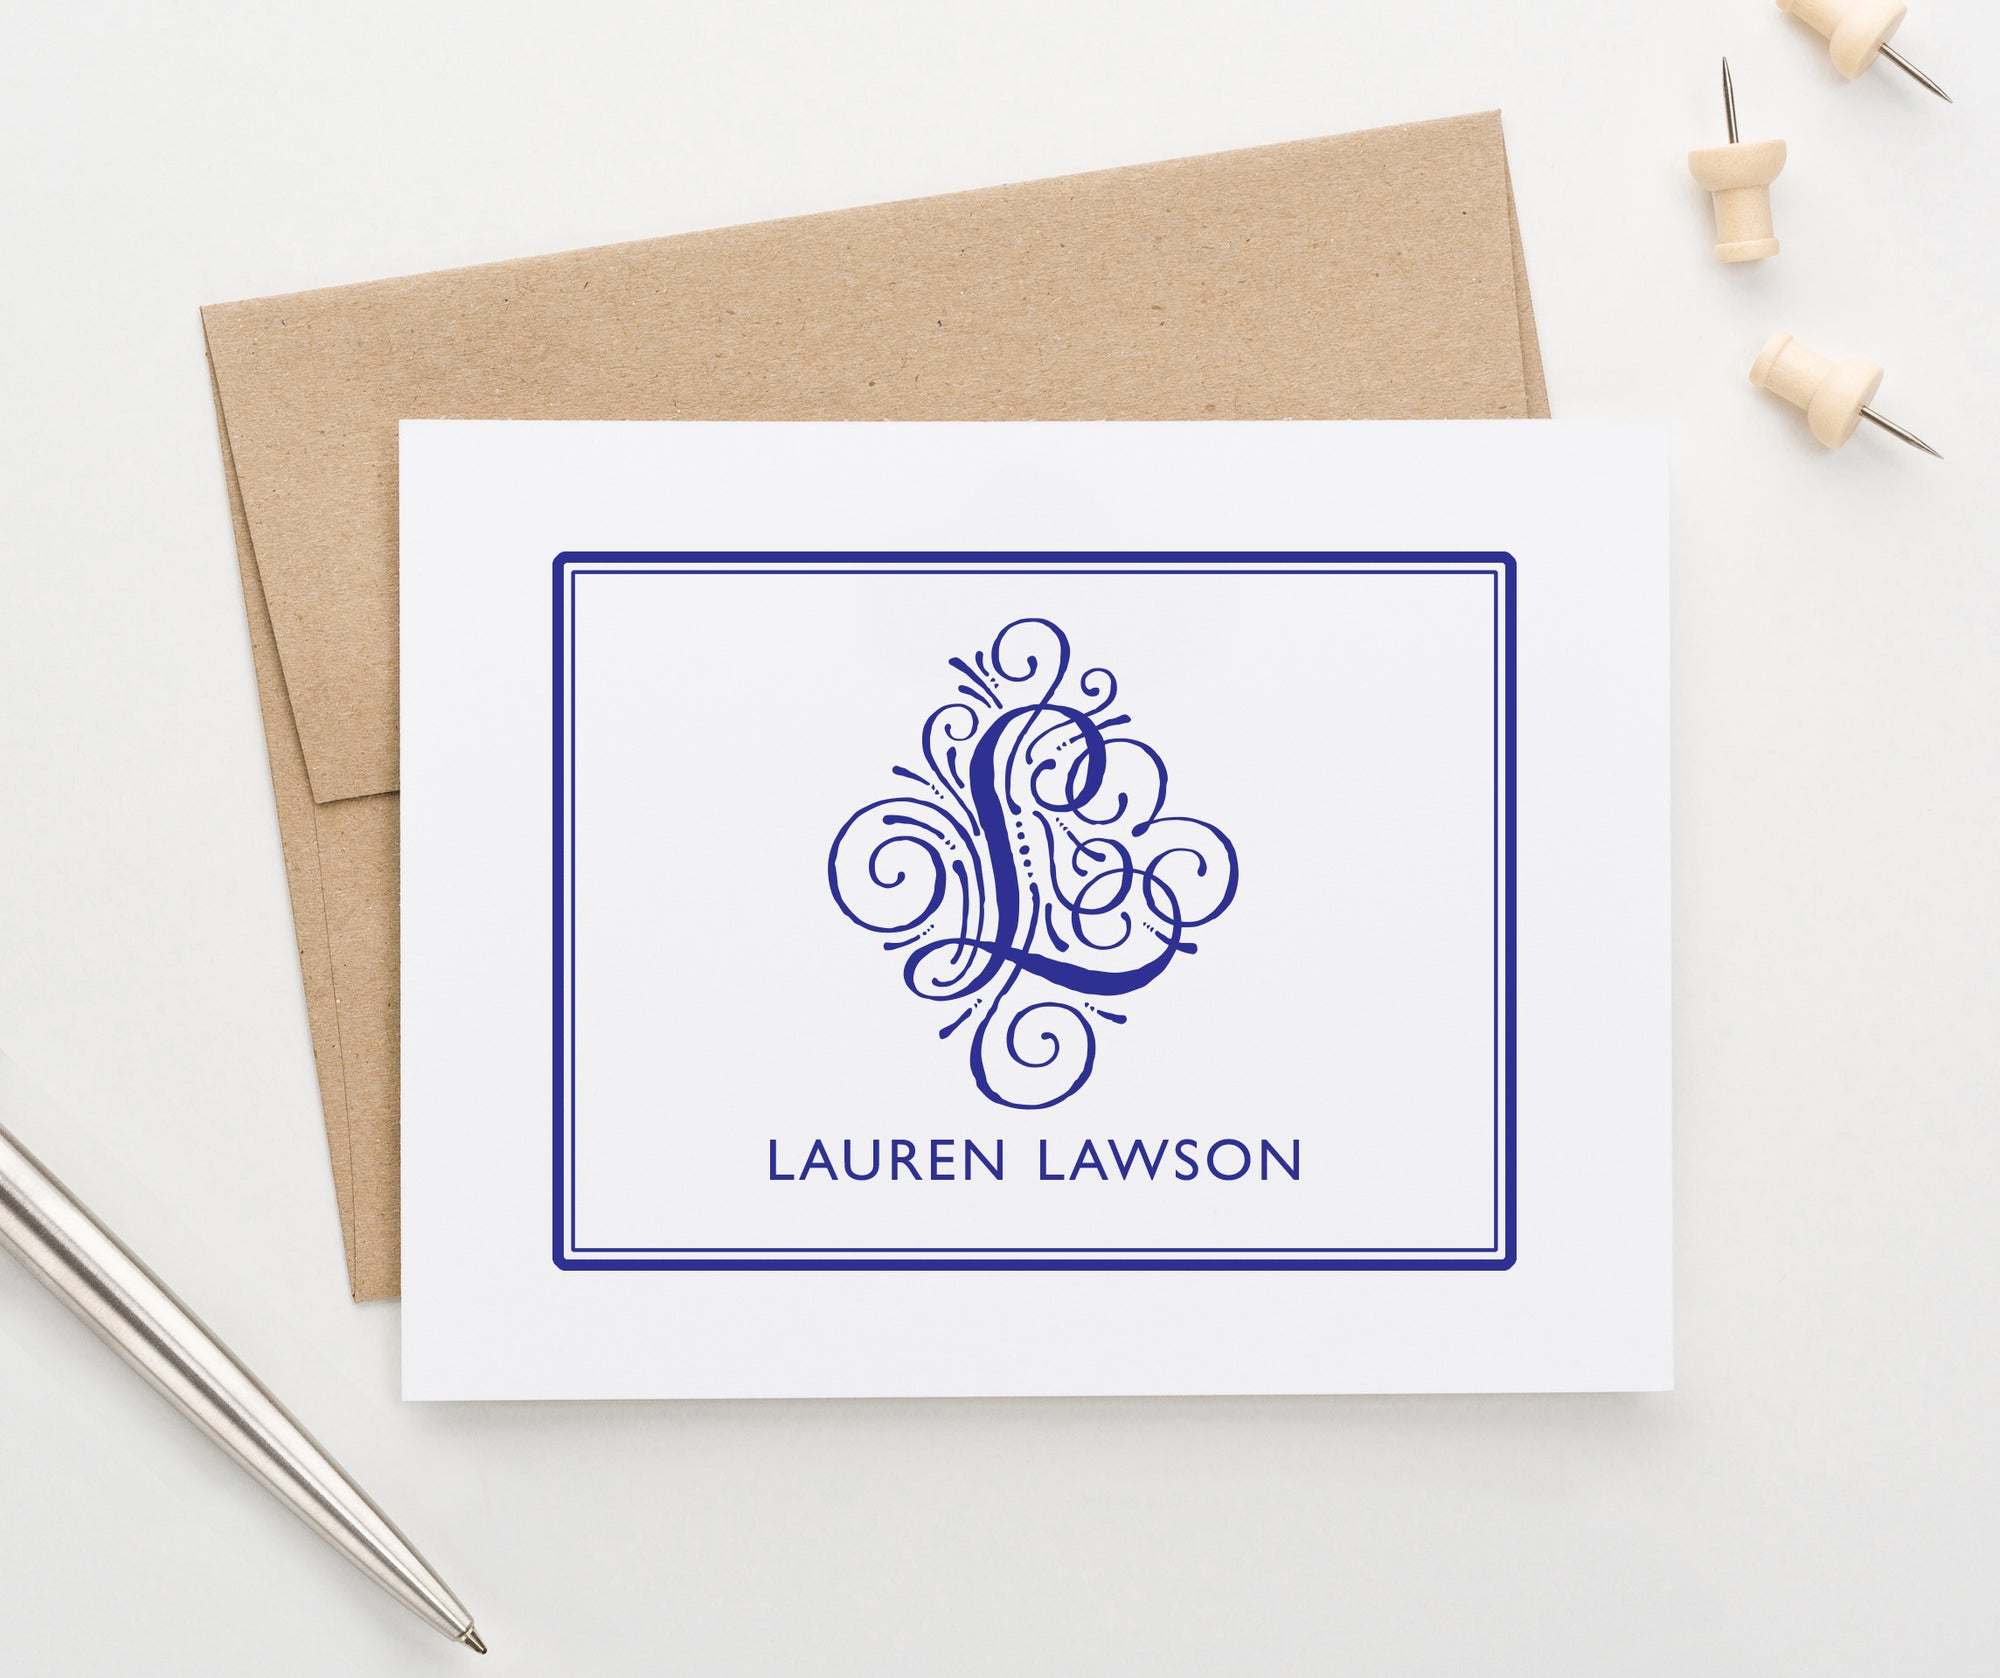 MS004 personalized folded 1 initial and name monogrammed stationary border elegant modern classic 